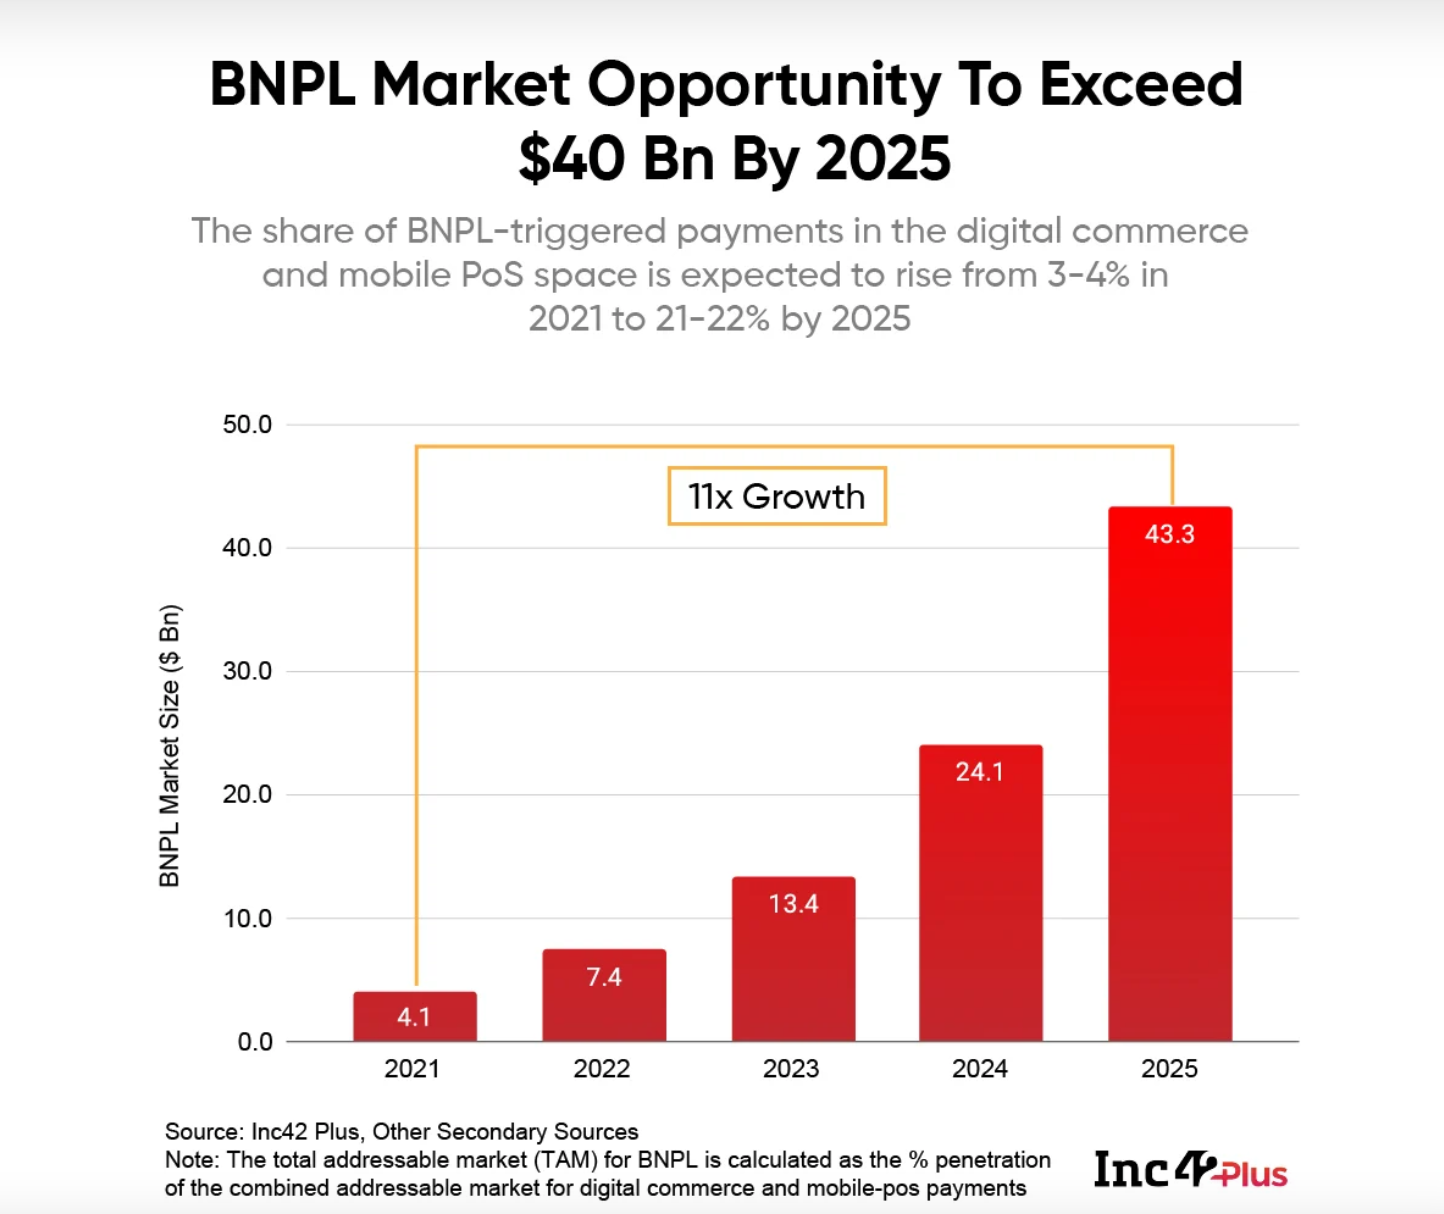 BNPL Market Opportunity To Exceed $40 Bn By 2025